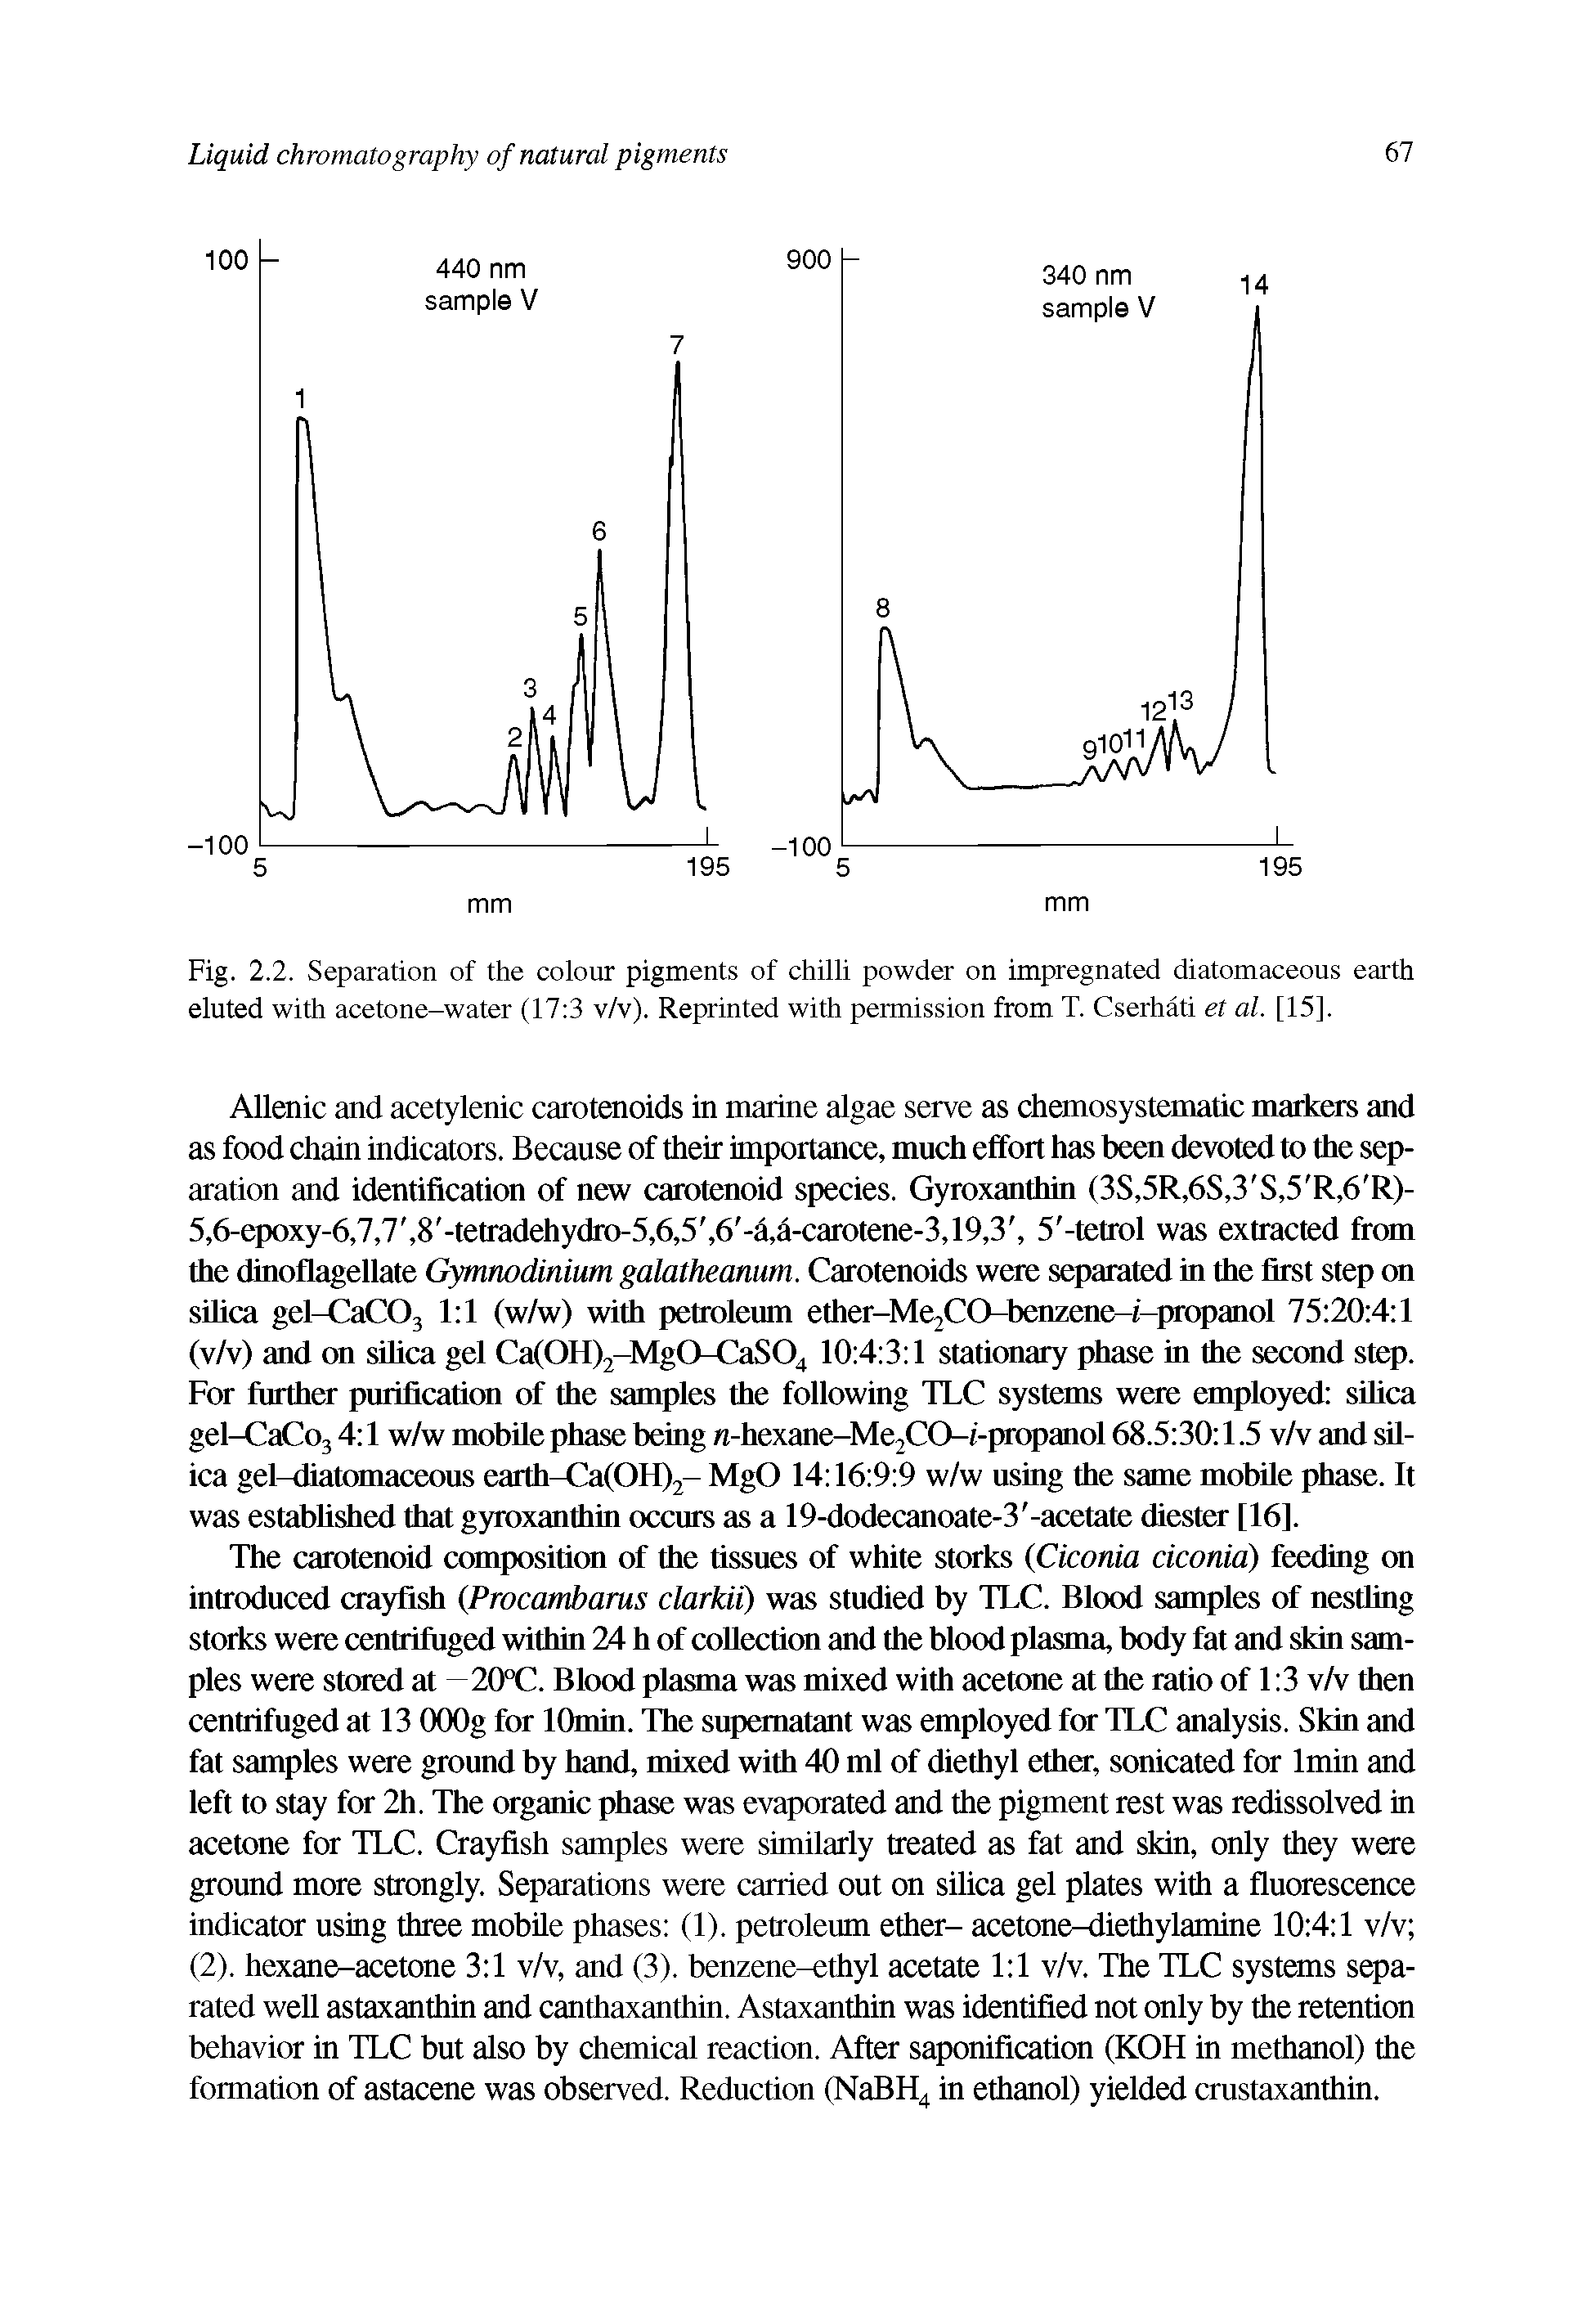 Fig. 2.2. Separation of the colour pigments of chilli powder on impregnated diatomaceous earth eluted with acetone-water (17 3 v/v). Reprinted with permission from T. Cserhati et al. [15].